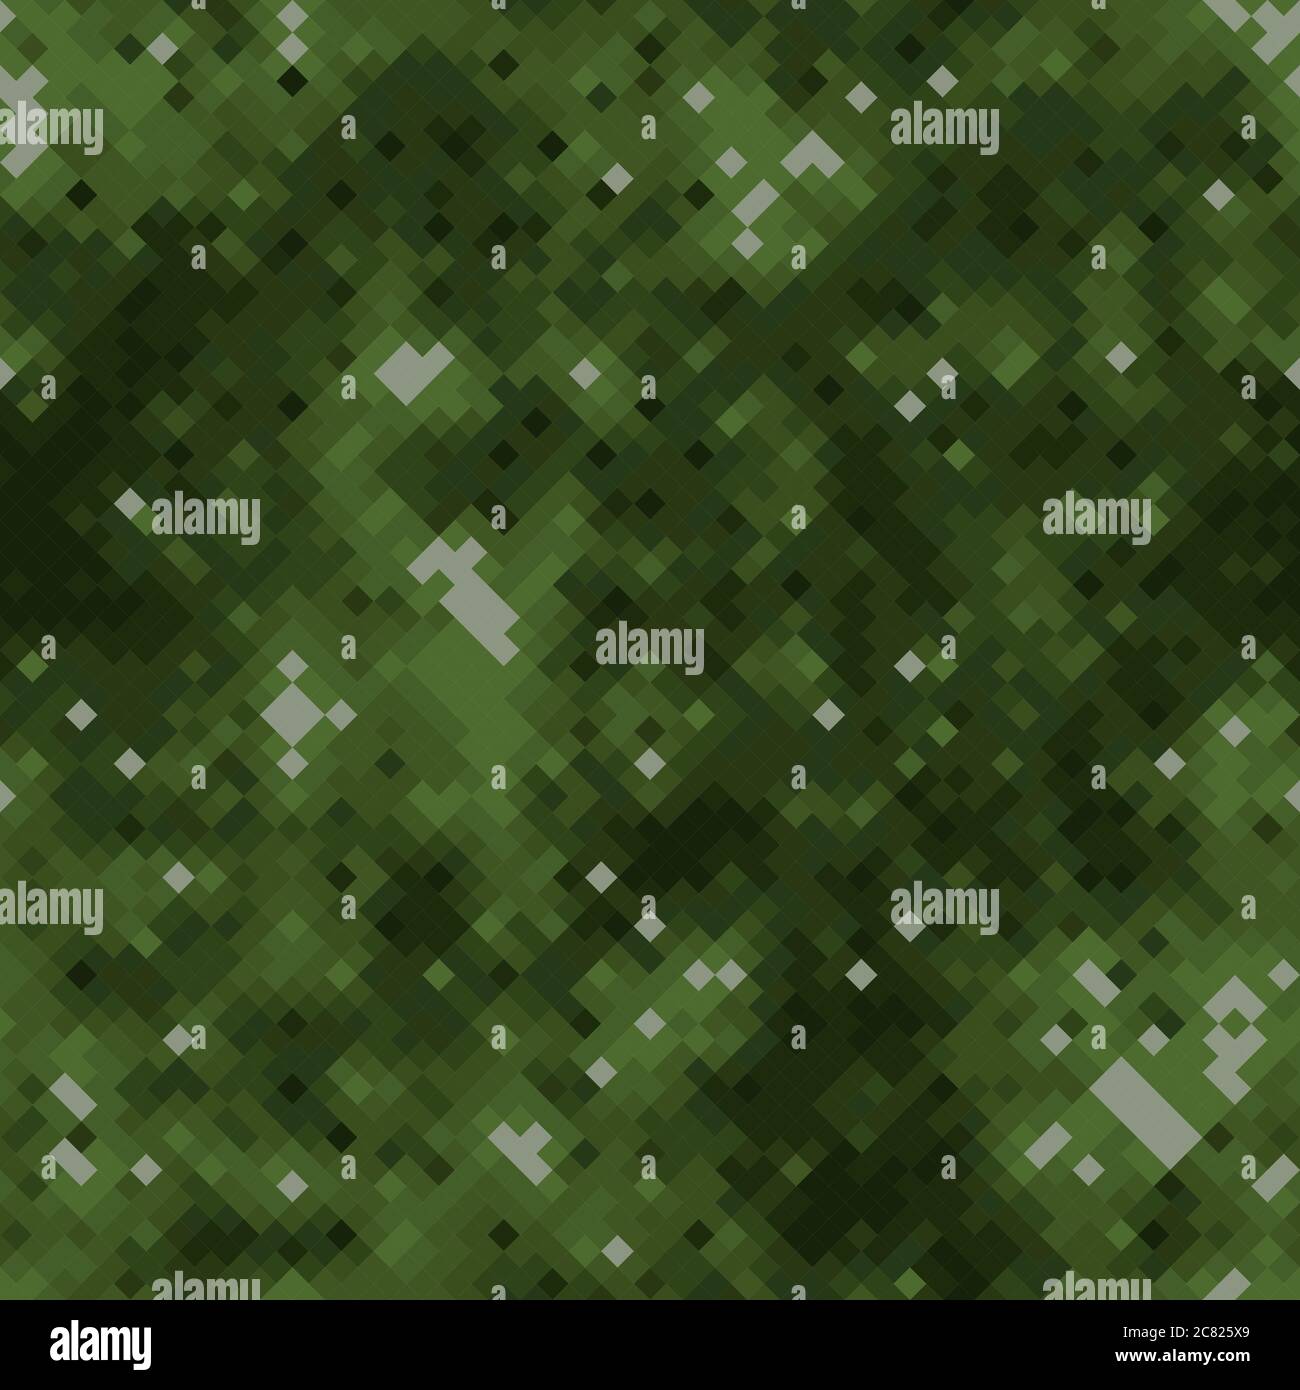 Light and dark green halftones camouflage seamless vector background texture Stock Vector